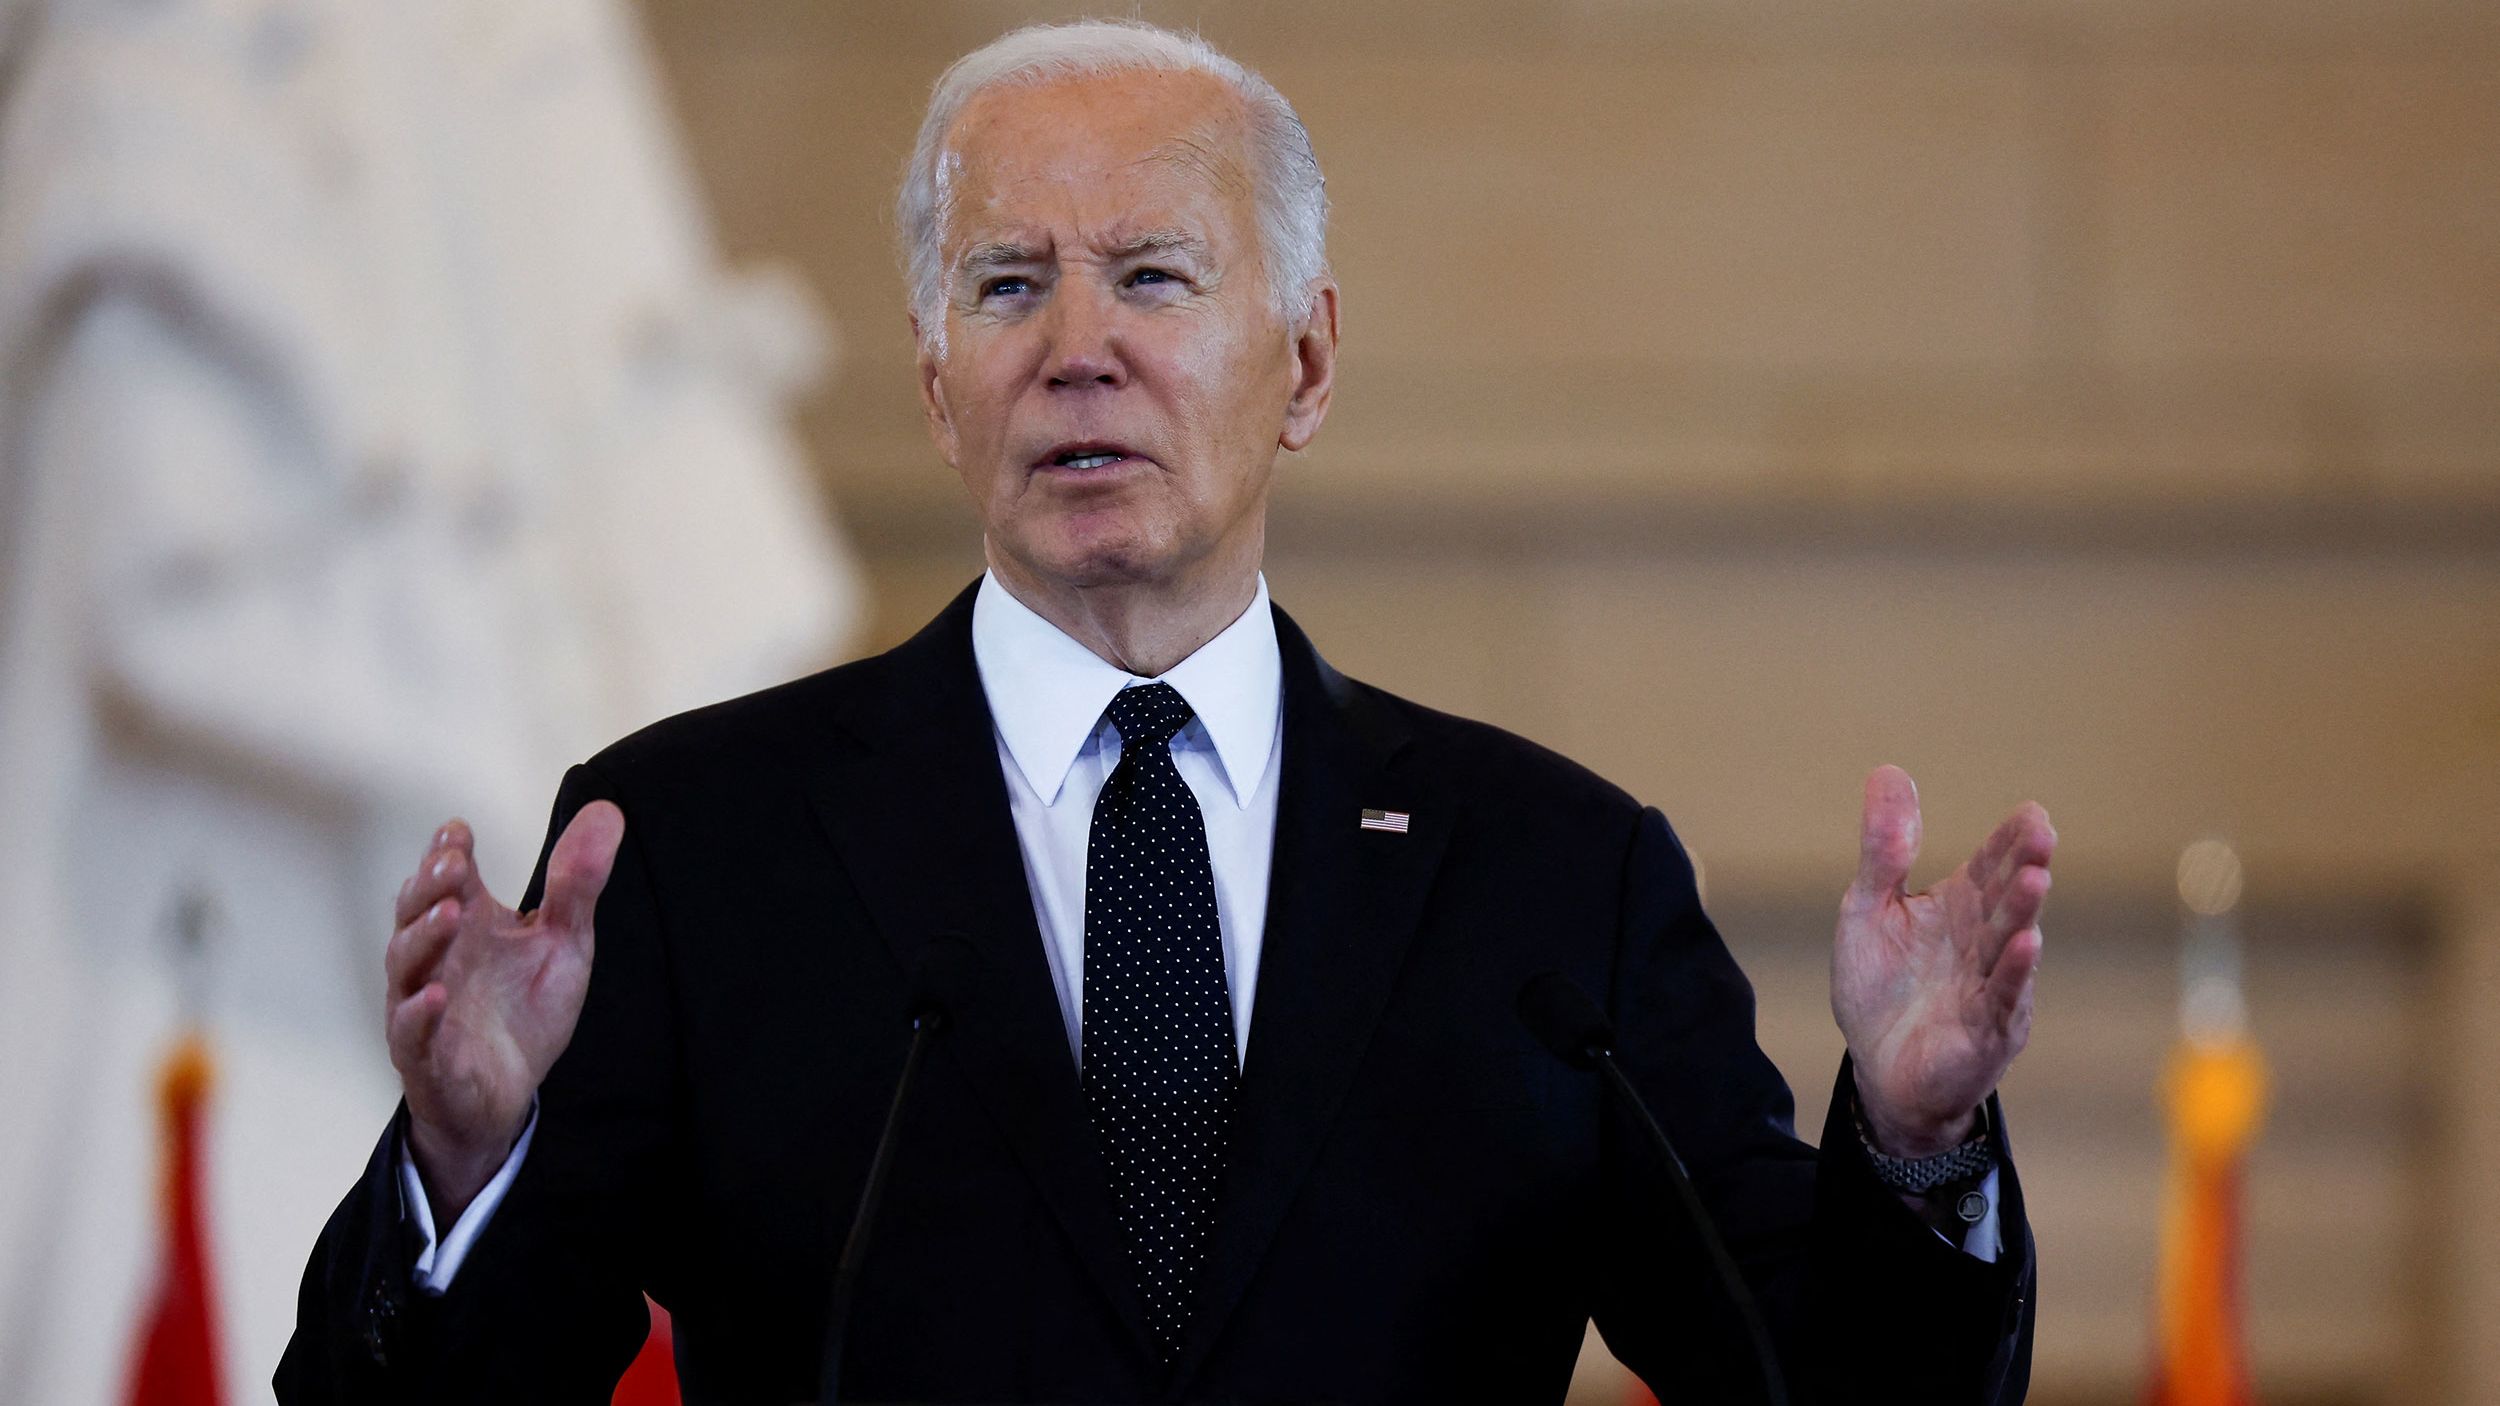 Biden Aims to Strengthen Worker and Consumer Influence Ahead of Election